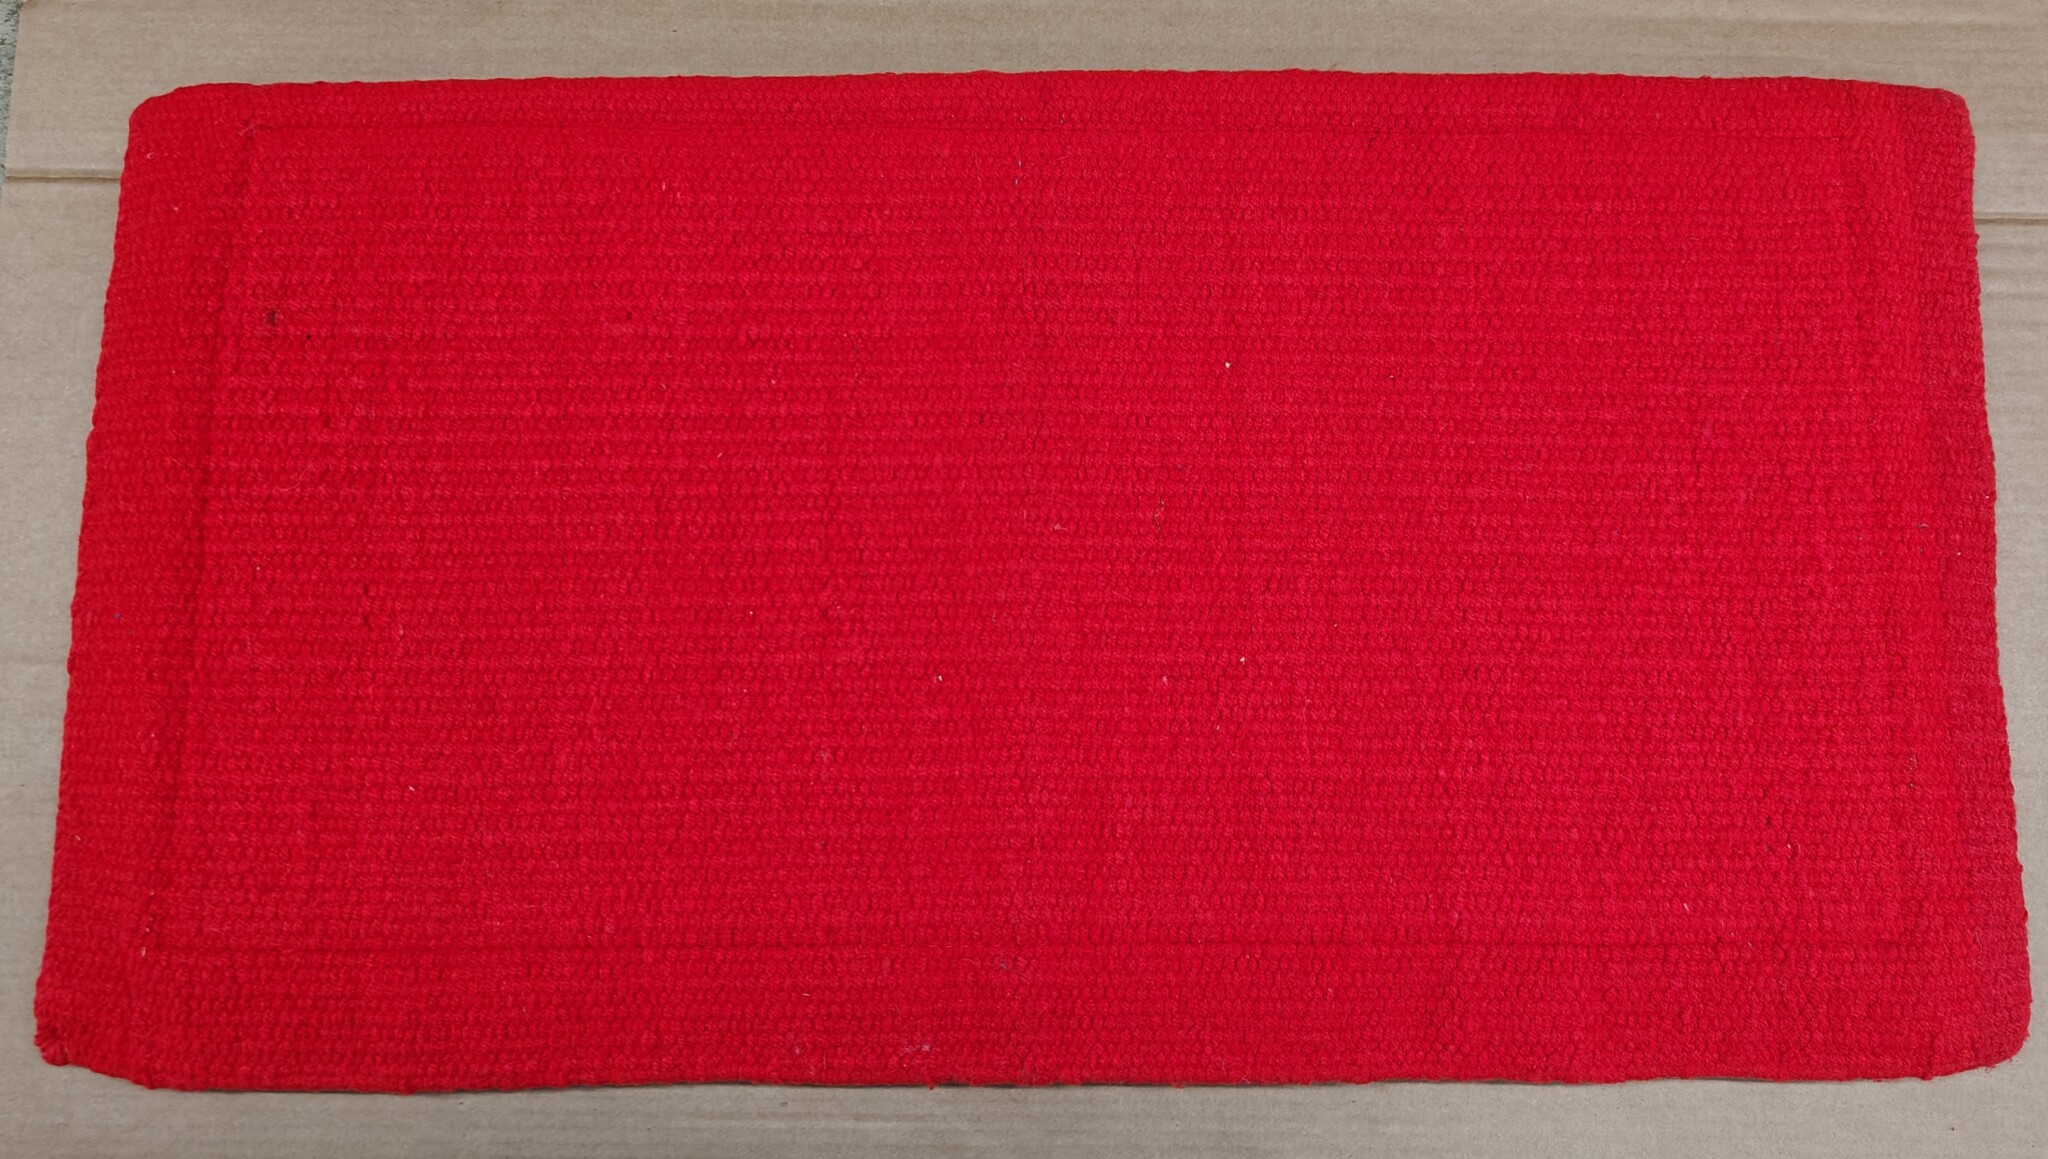 PAD-SP9500-RED